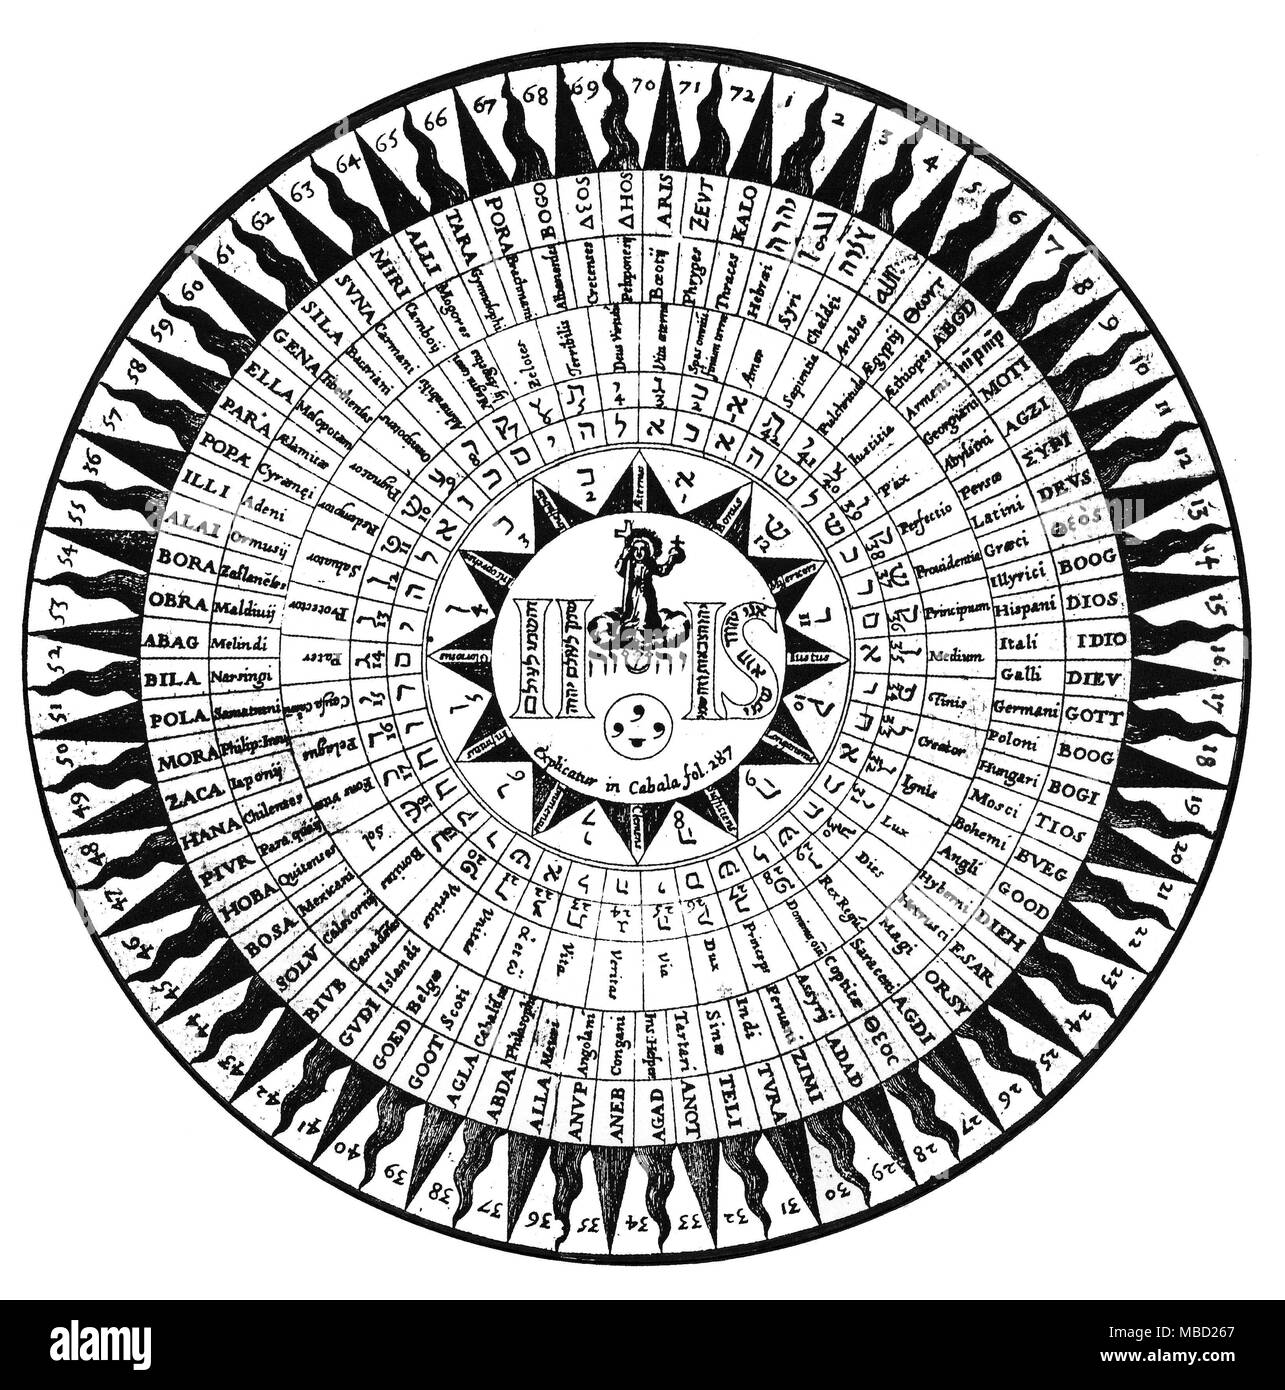 NUMEROLOGY - THE NUMBER 72 Engraving exhibiting the 72 Cabbalistic names of God, in 72 languages. In the complete engraving (of which this is a detail), the 72 solar points are represented as a 72 petalled flowe, and are linked with the twelve Tribes of Israel, each of which is accorded a zodiacal sign. From Athanasius Kircher, Oedipus Aegyptiacus, Vol II, c. 1653. Stock Photo